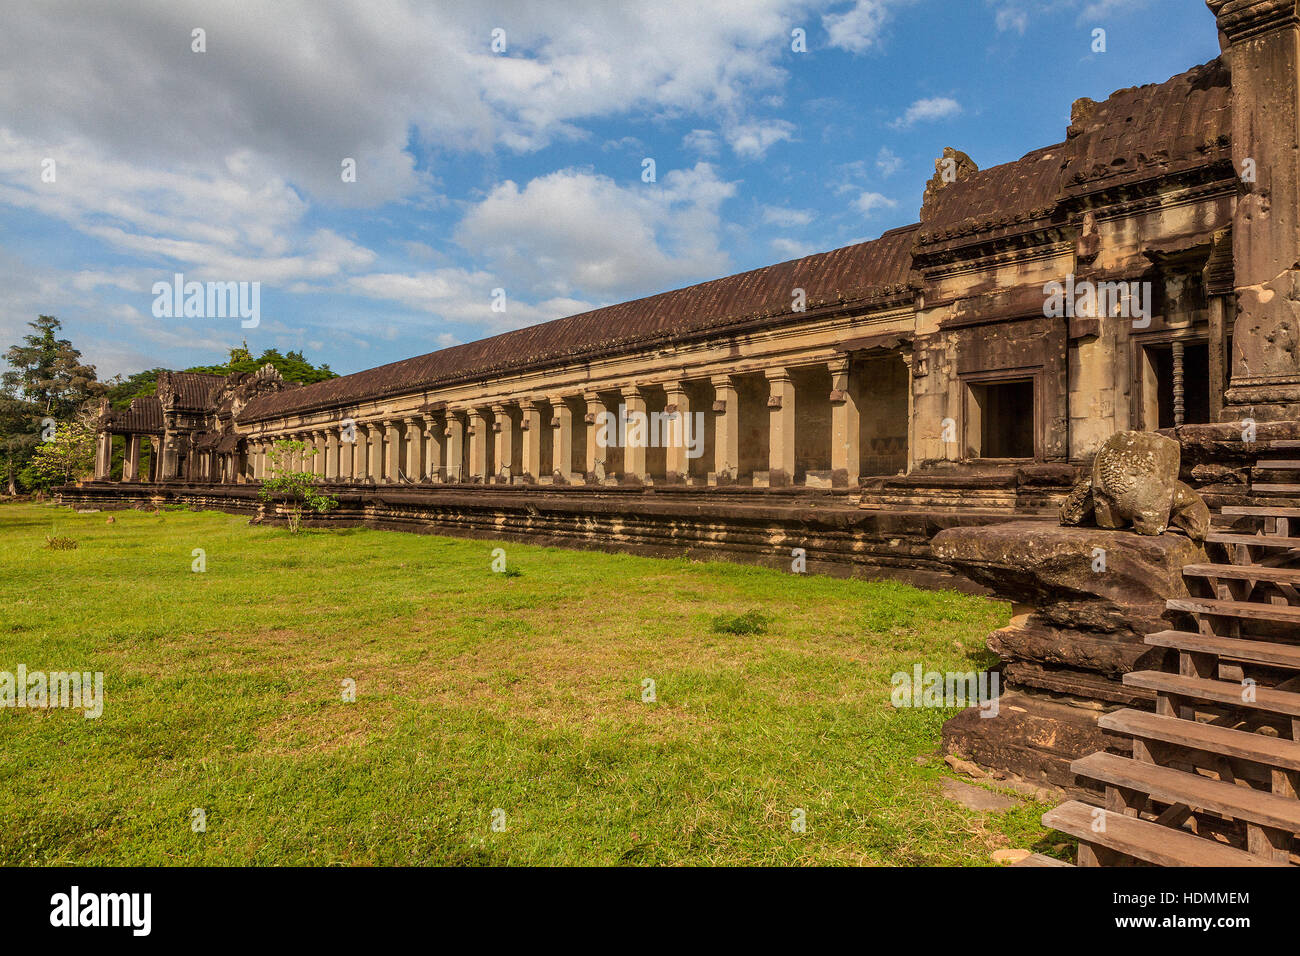 Facade of the ancient, 12th century Khmer temple at Angkor Wat featuring the north gallery. Siem Reap, Kingdom of Cambodia. Stock Photo